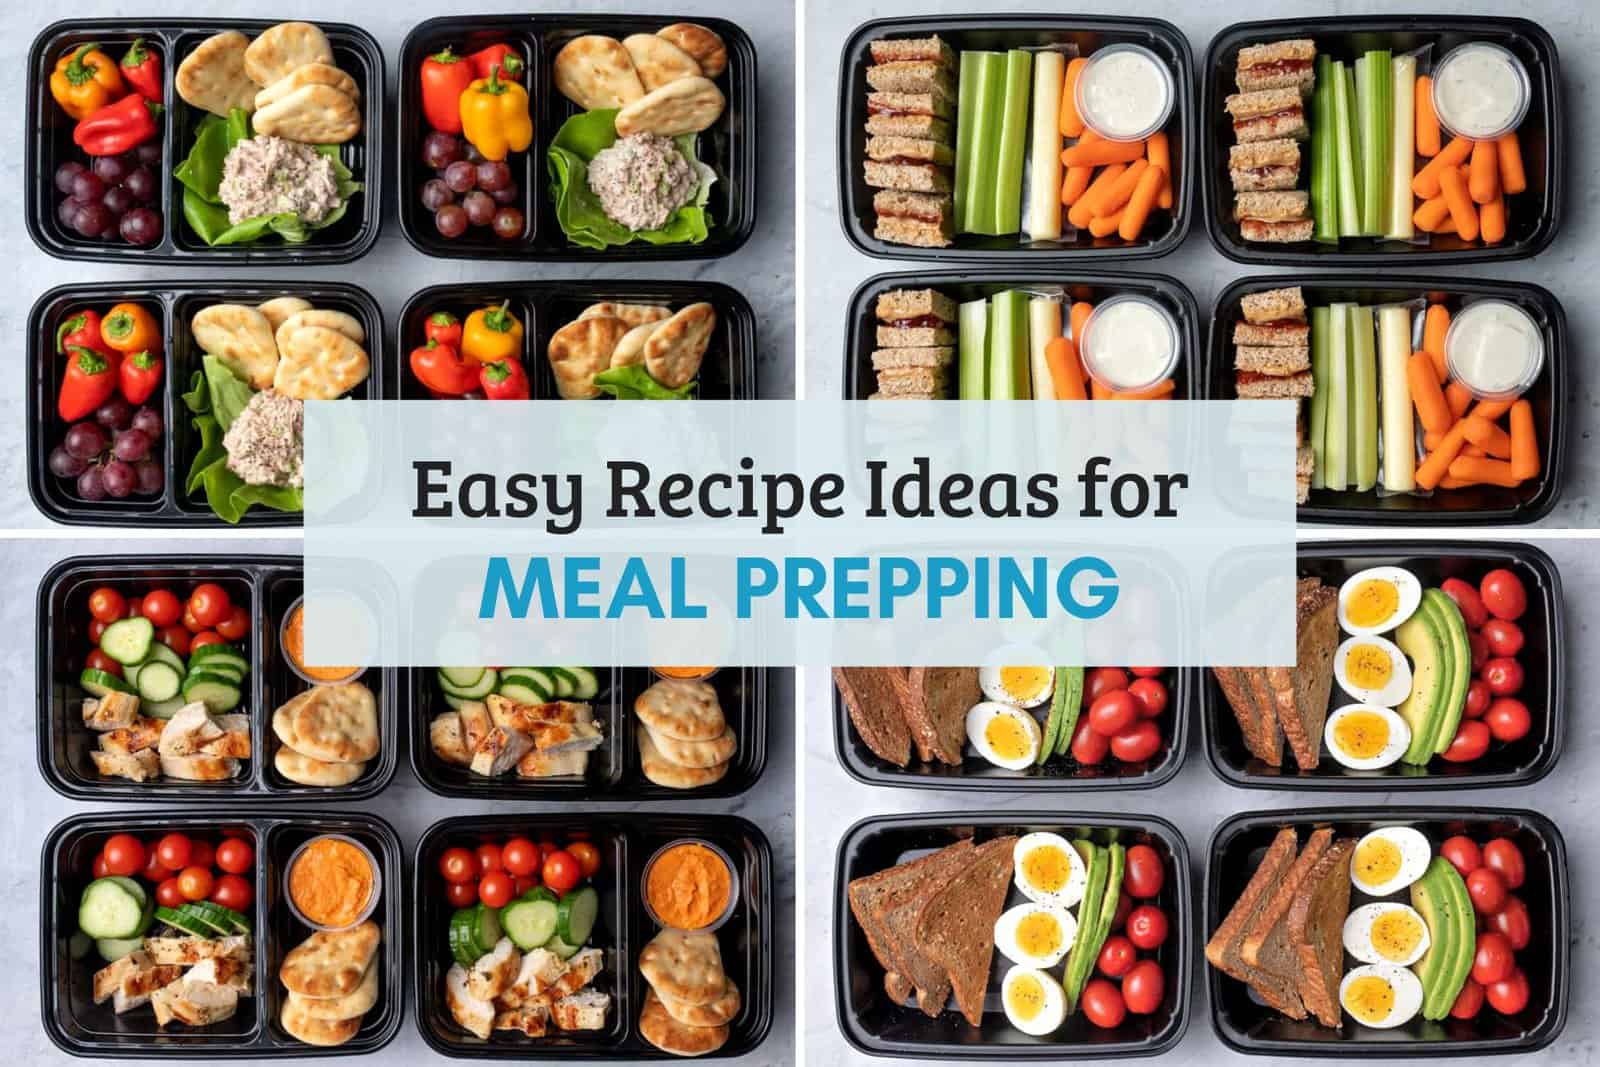 https://feelgoodfoodie.net/wp-content/uploads/2023/04/RoundUp_Meal_Prep_Recipes_Horizontal.jpg